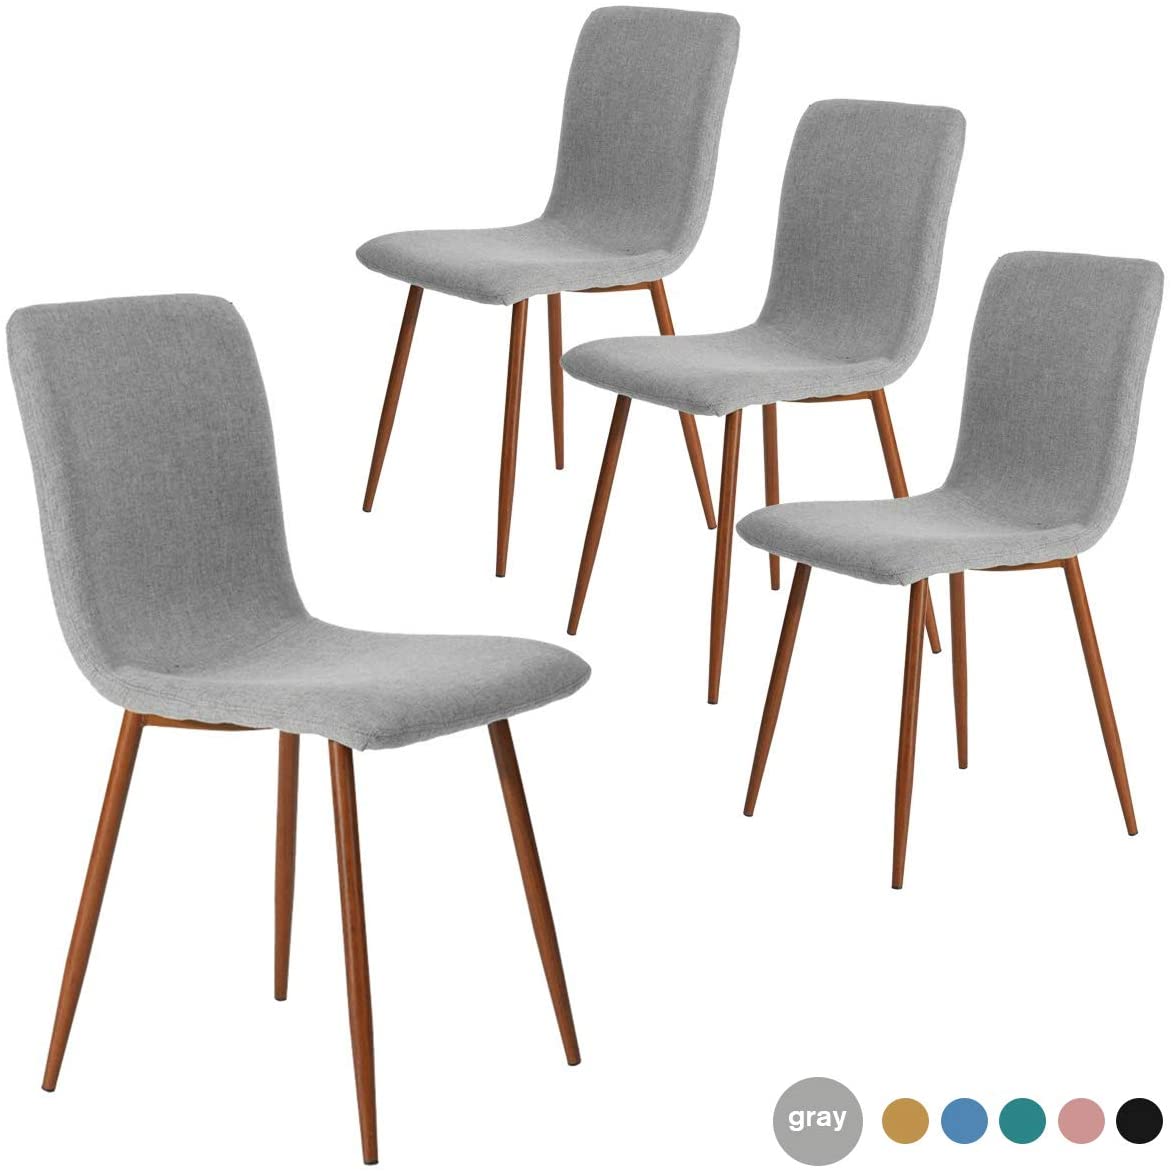 2. Dining Chairs by Coavas